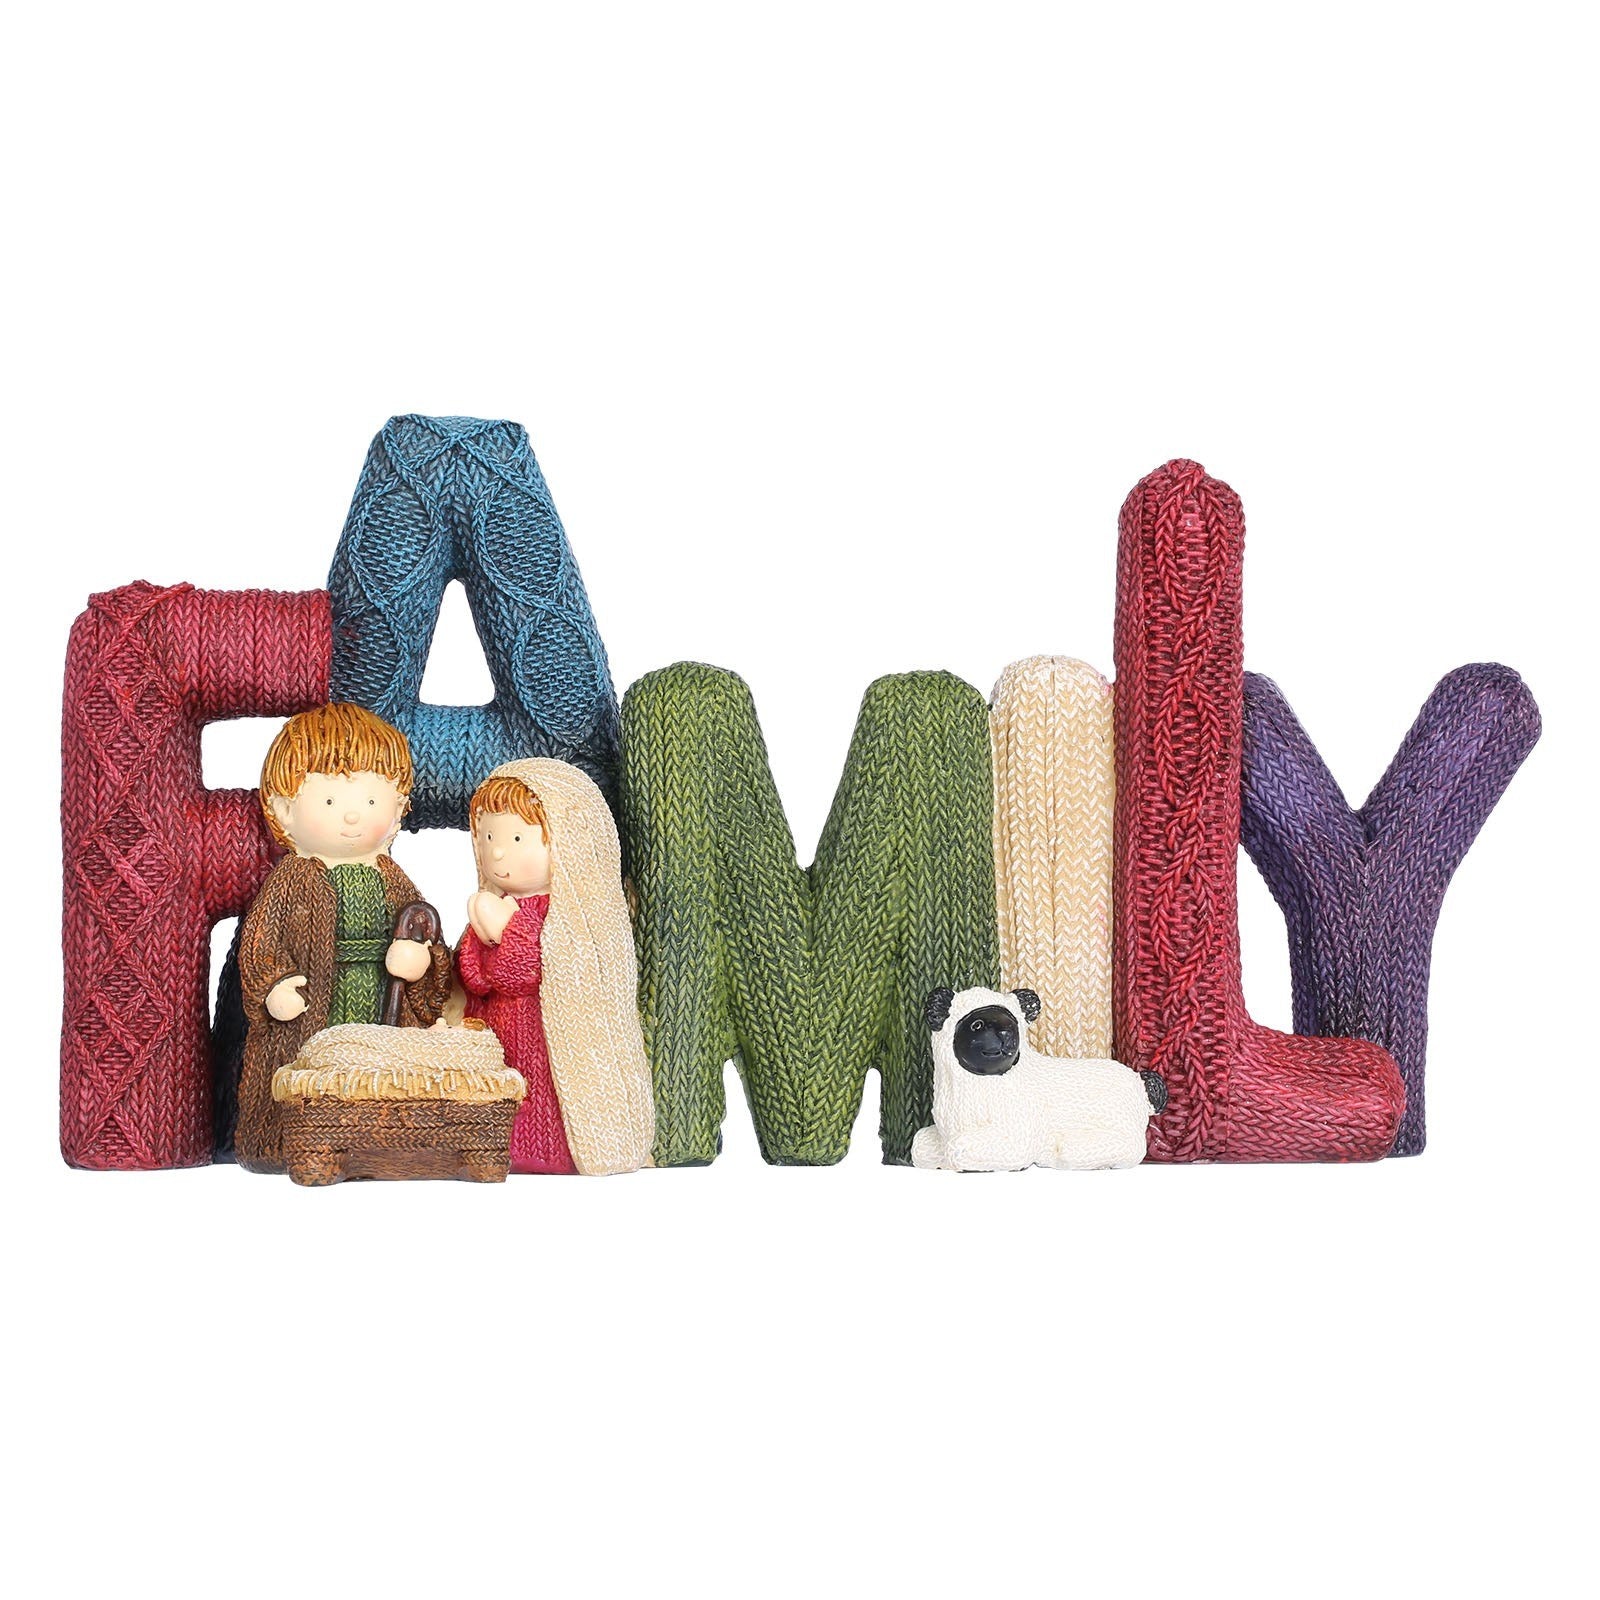 Get the thoughtful gifts to show your love & appreciation for your family